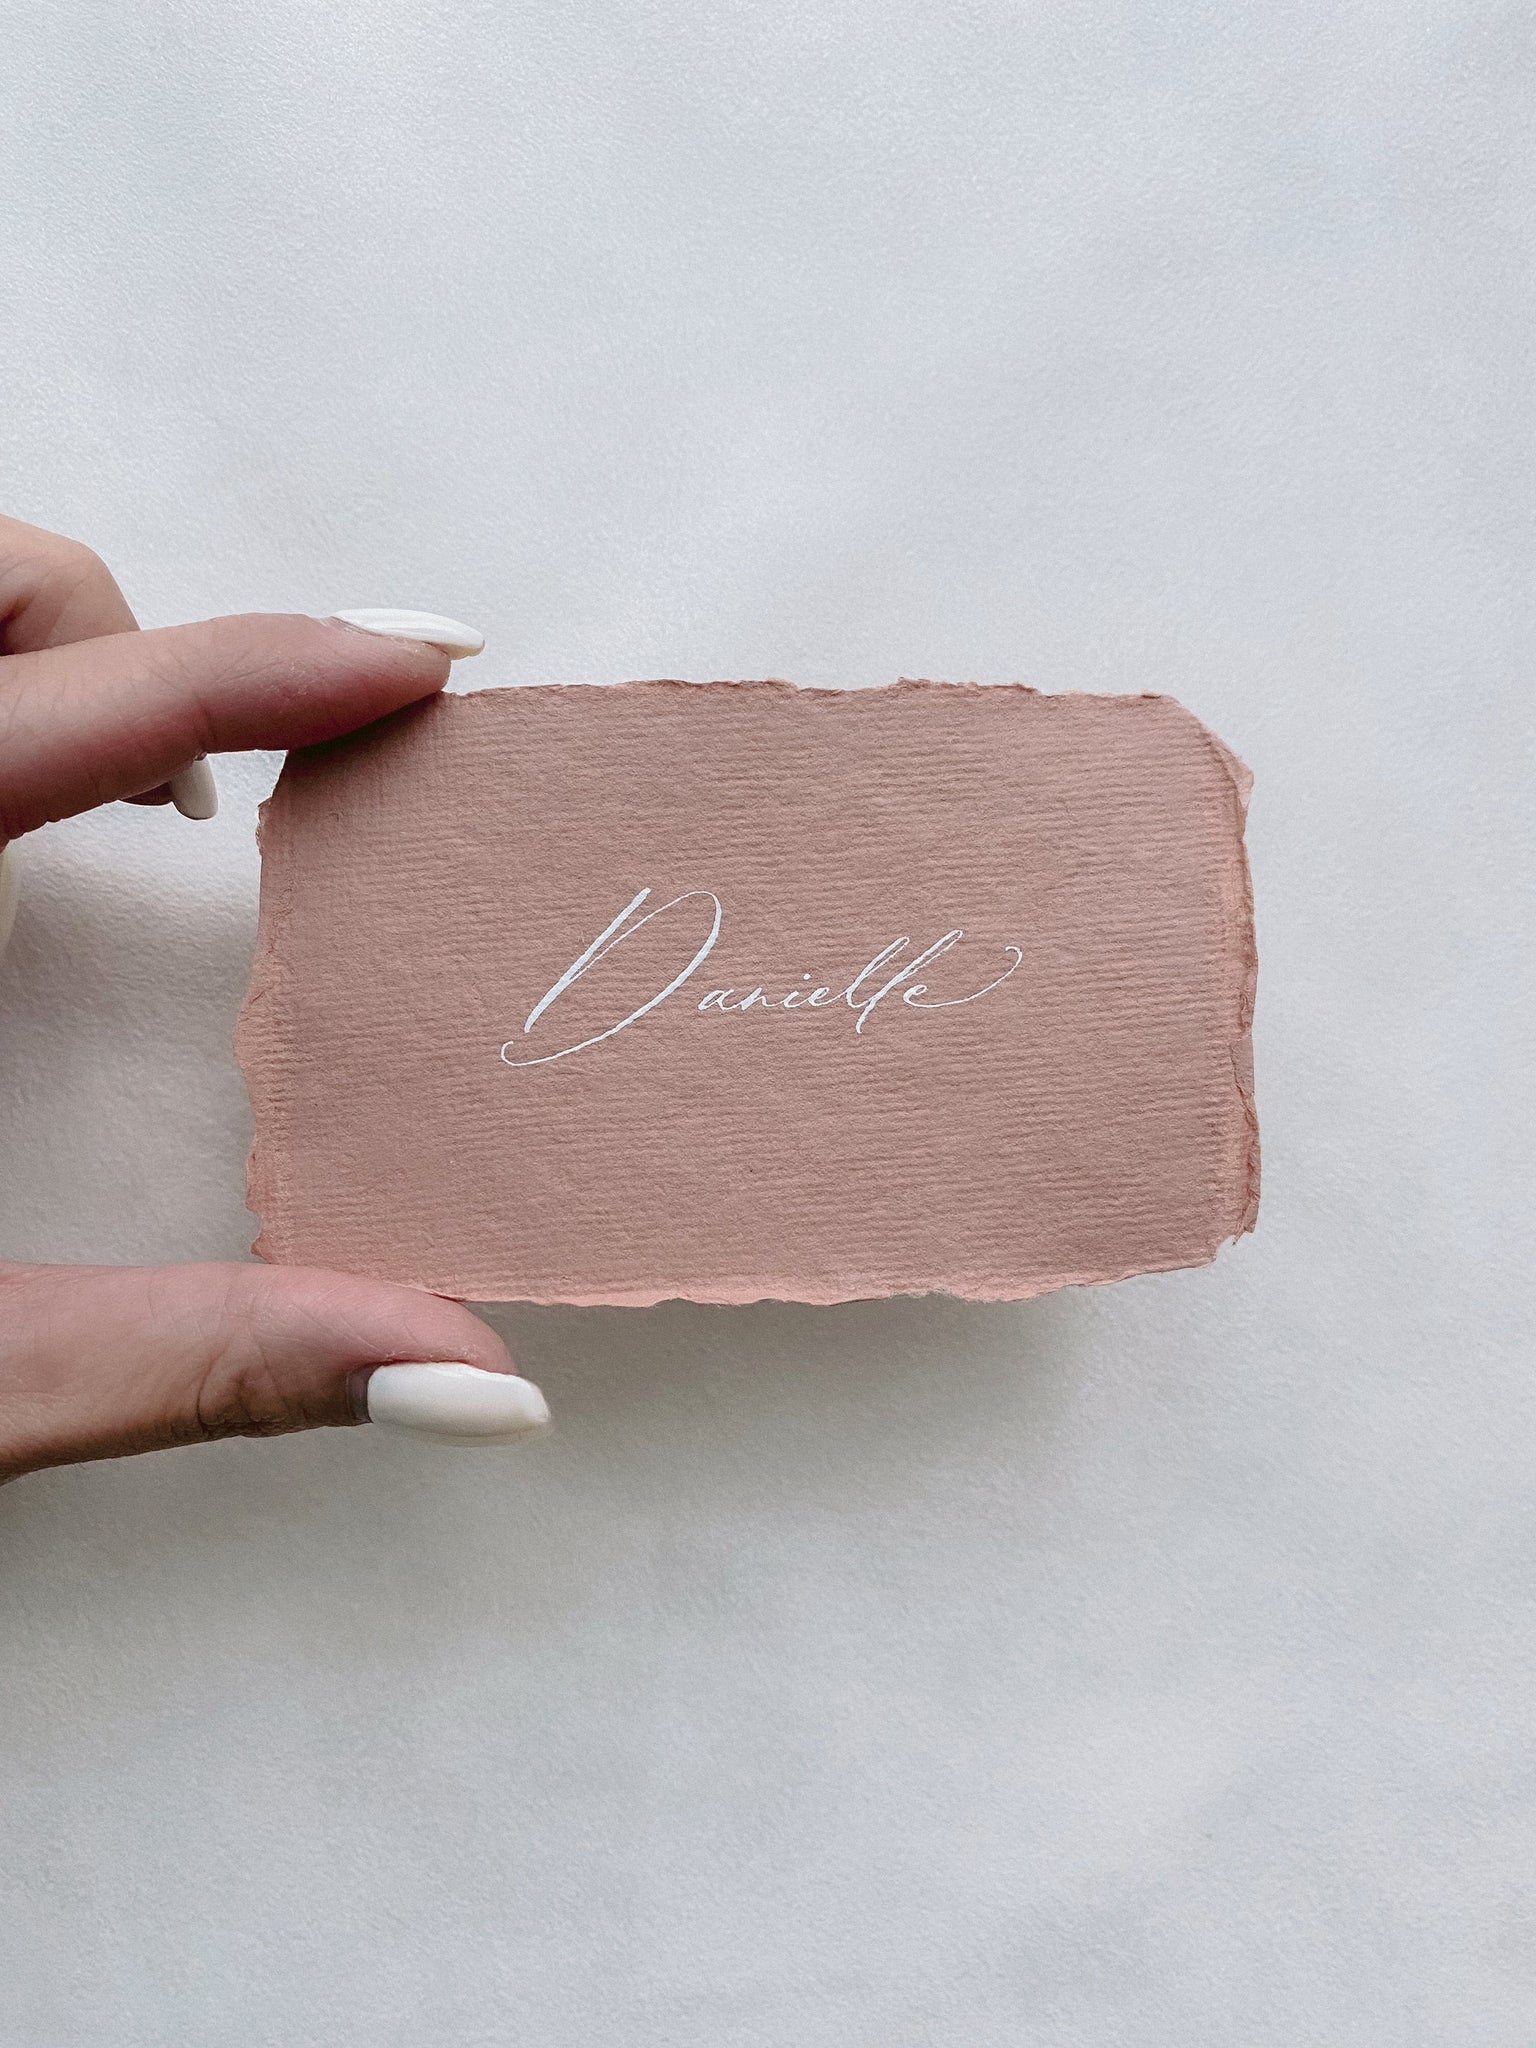 handmade paper place card in terracotta color hand lettered in modern calligraphy in white ink